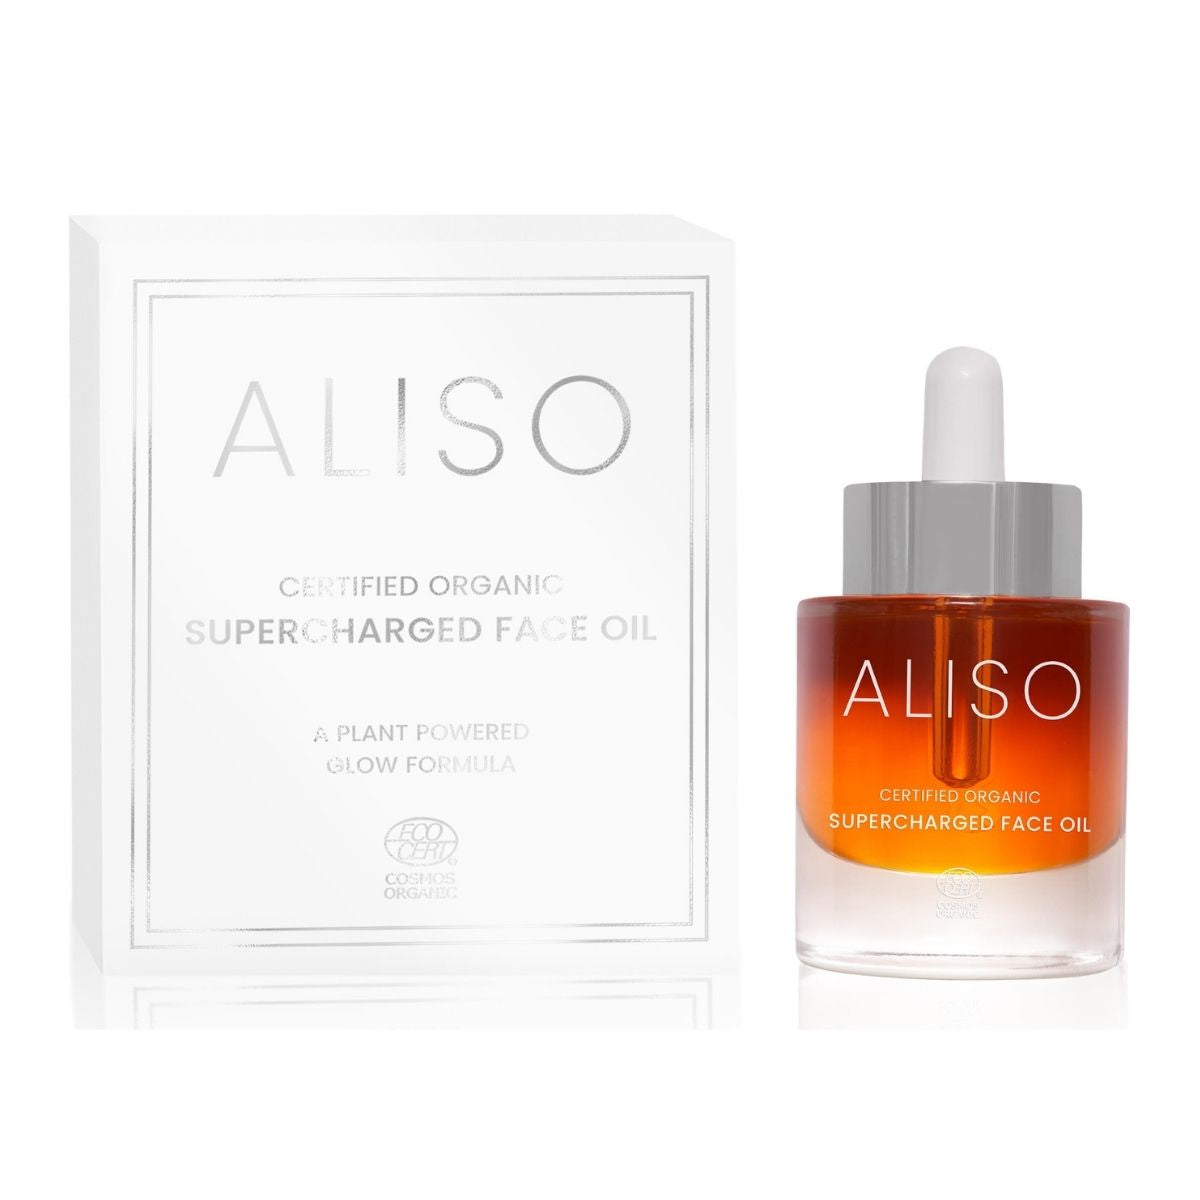 Aliso Supercharged Face Oil